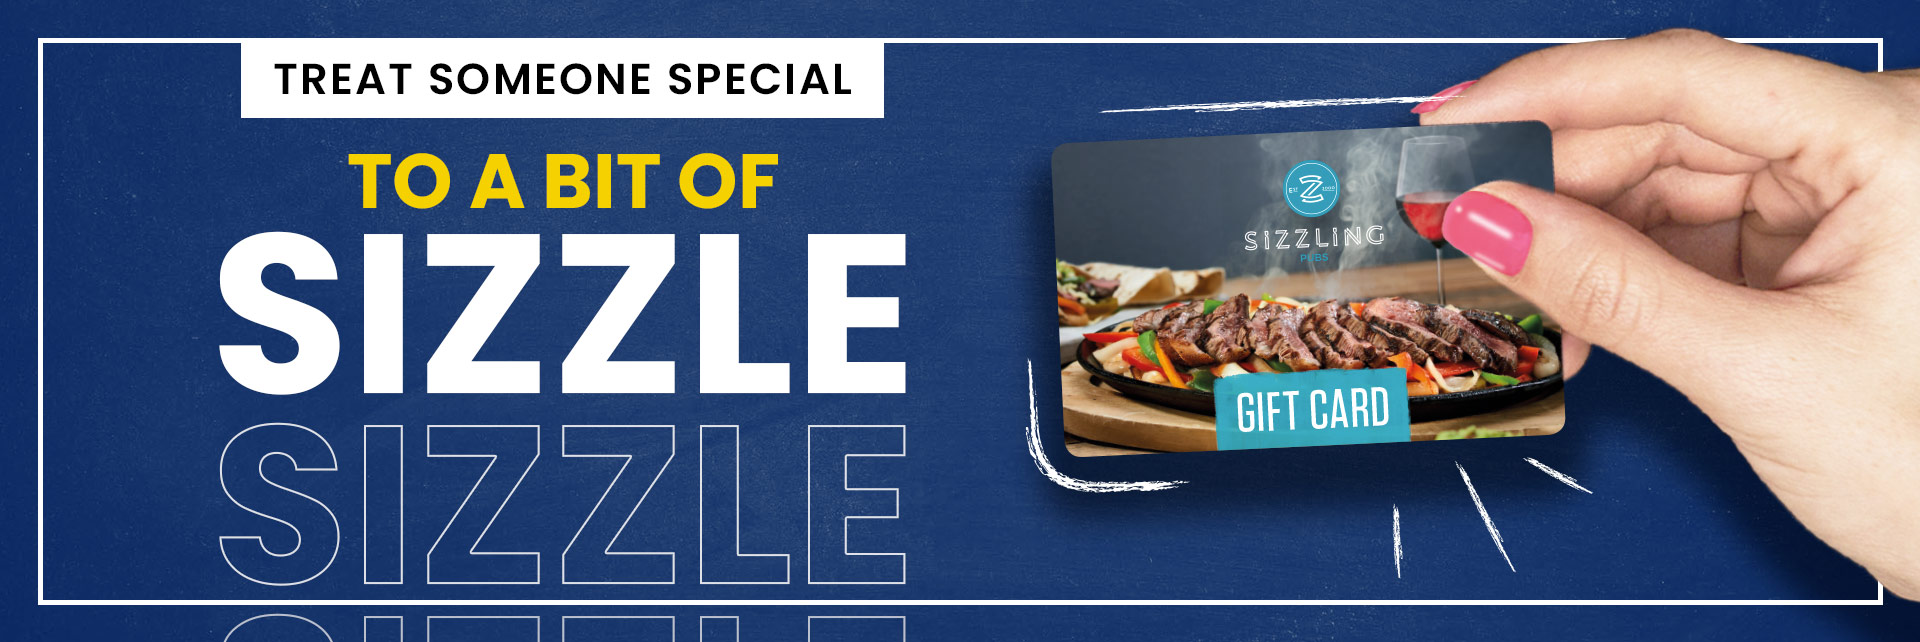 Sizzling Pubs Gift Card at SUB Virtual in 